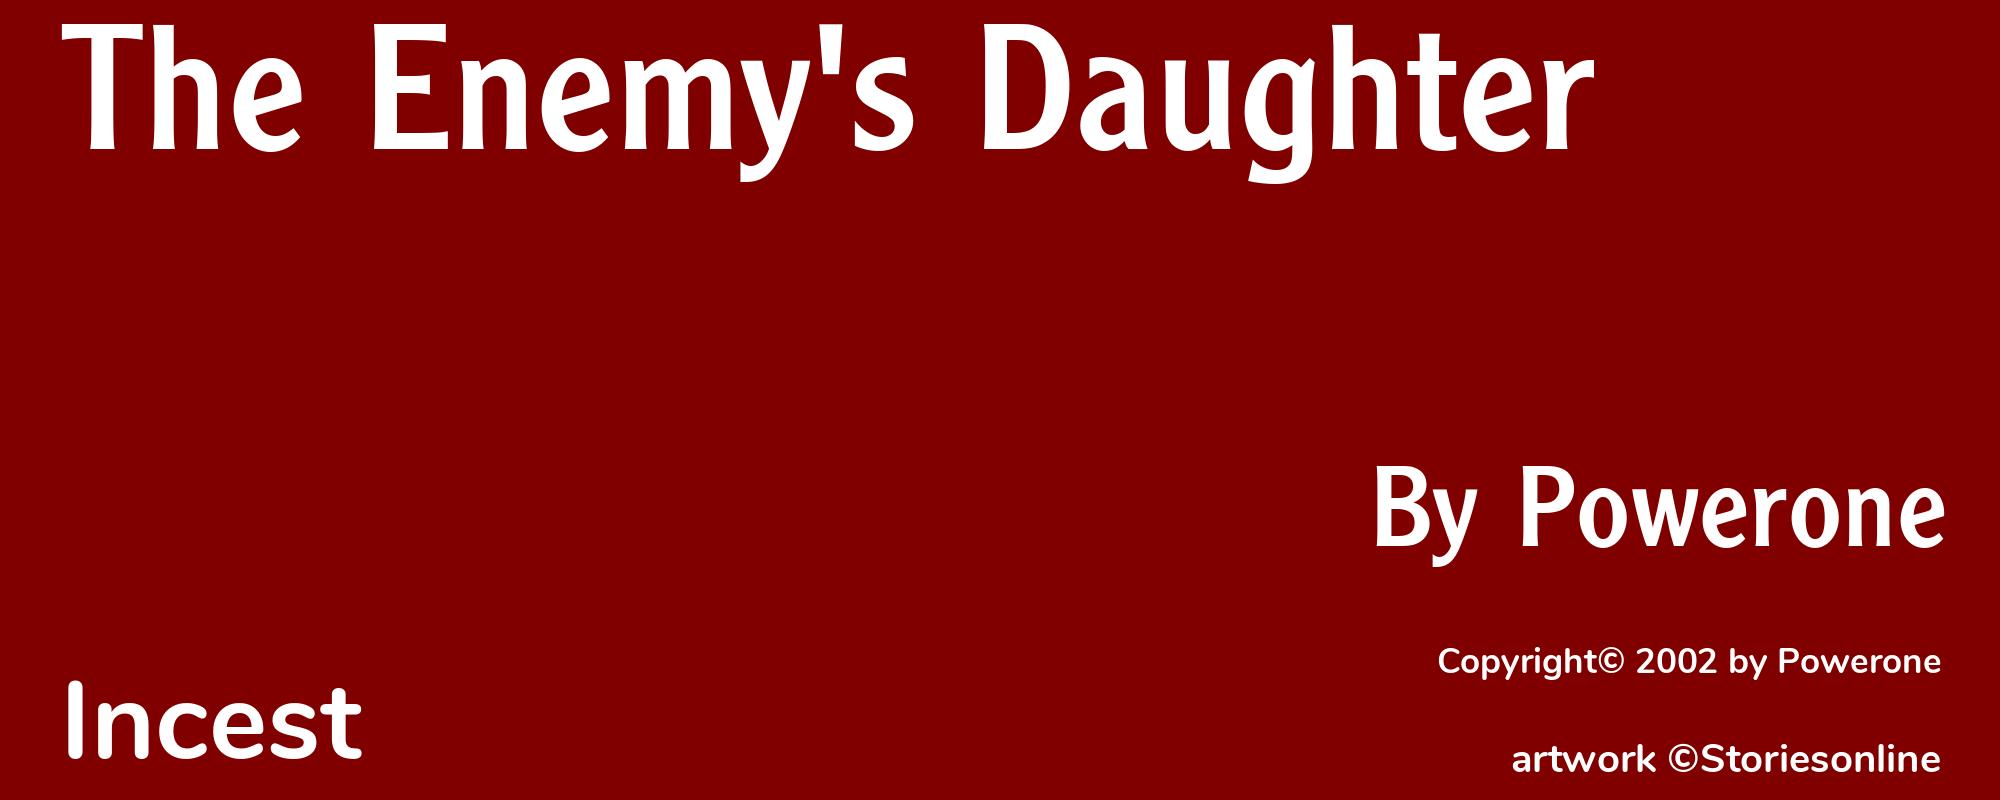 The Enemy's Daughter - Cover